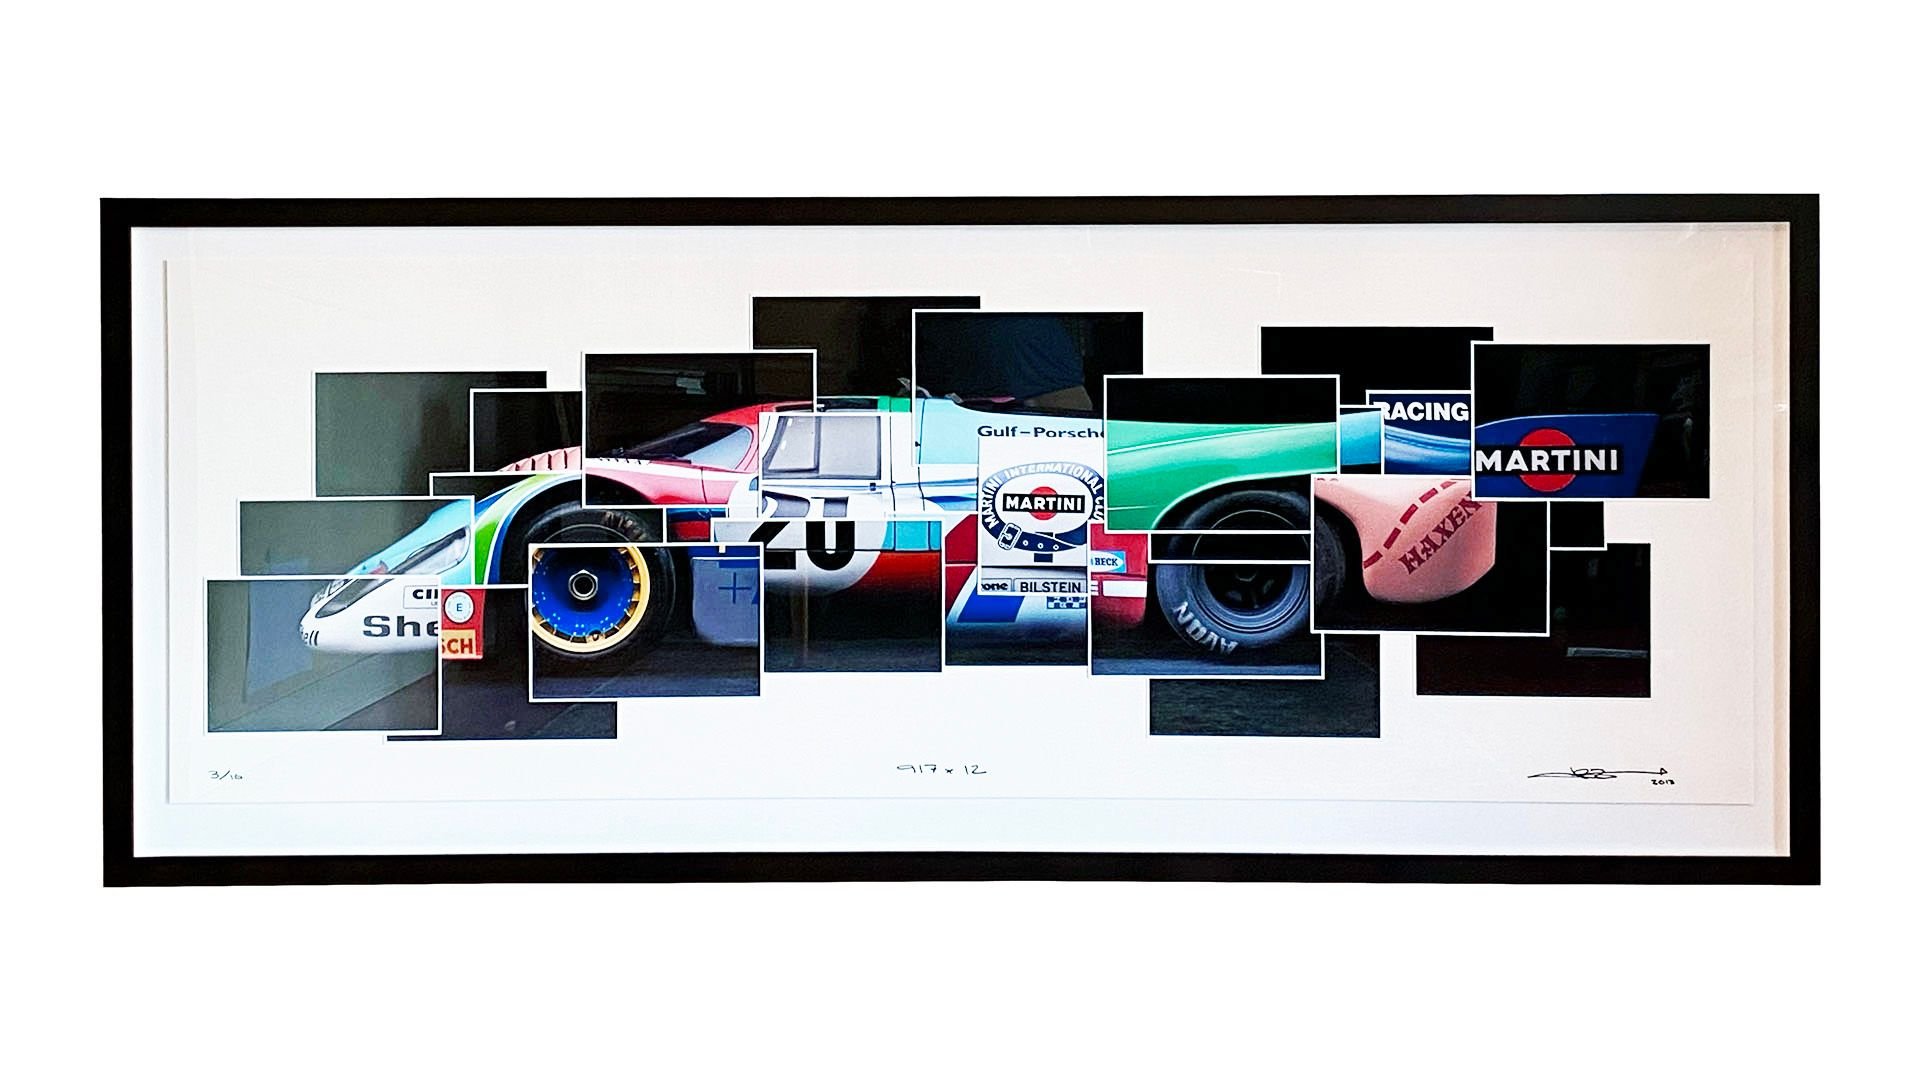 For Sale “917 x 12” by Jeff Zwart, 2014, No. 3 of 10